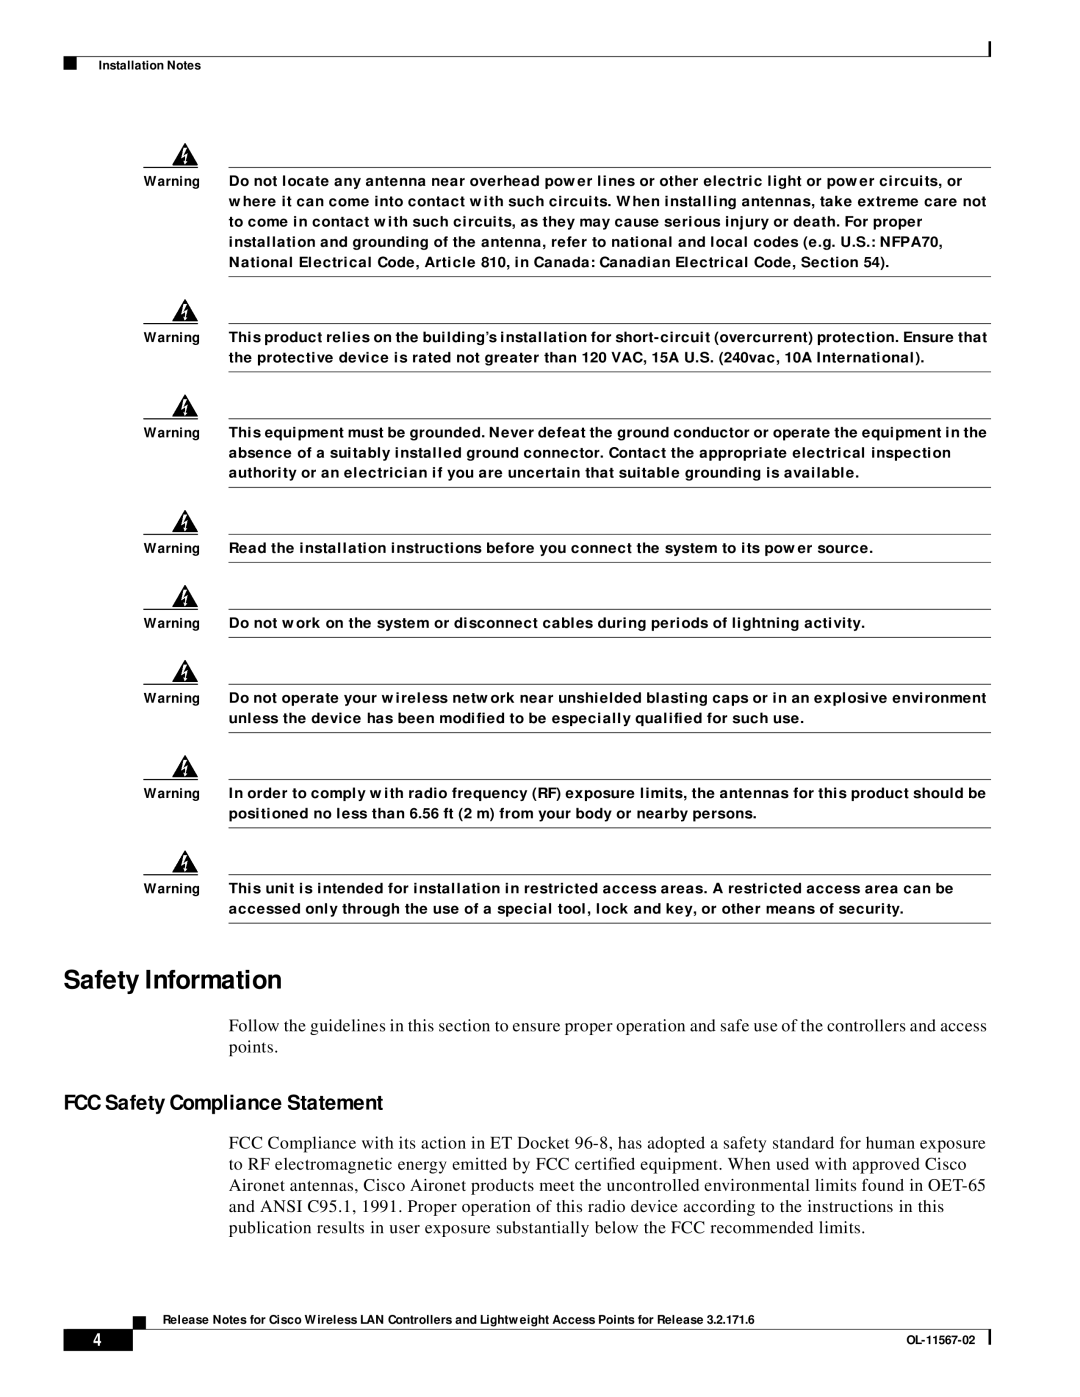 Cisco Systems OL-11567-02 manual Safety Information, FCC Safety Compliance Statement 